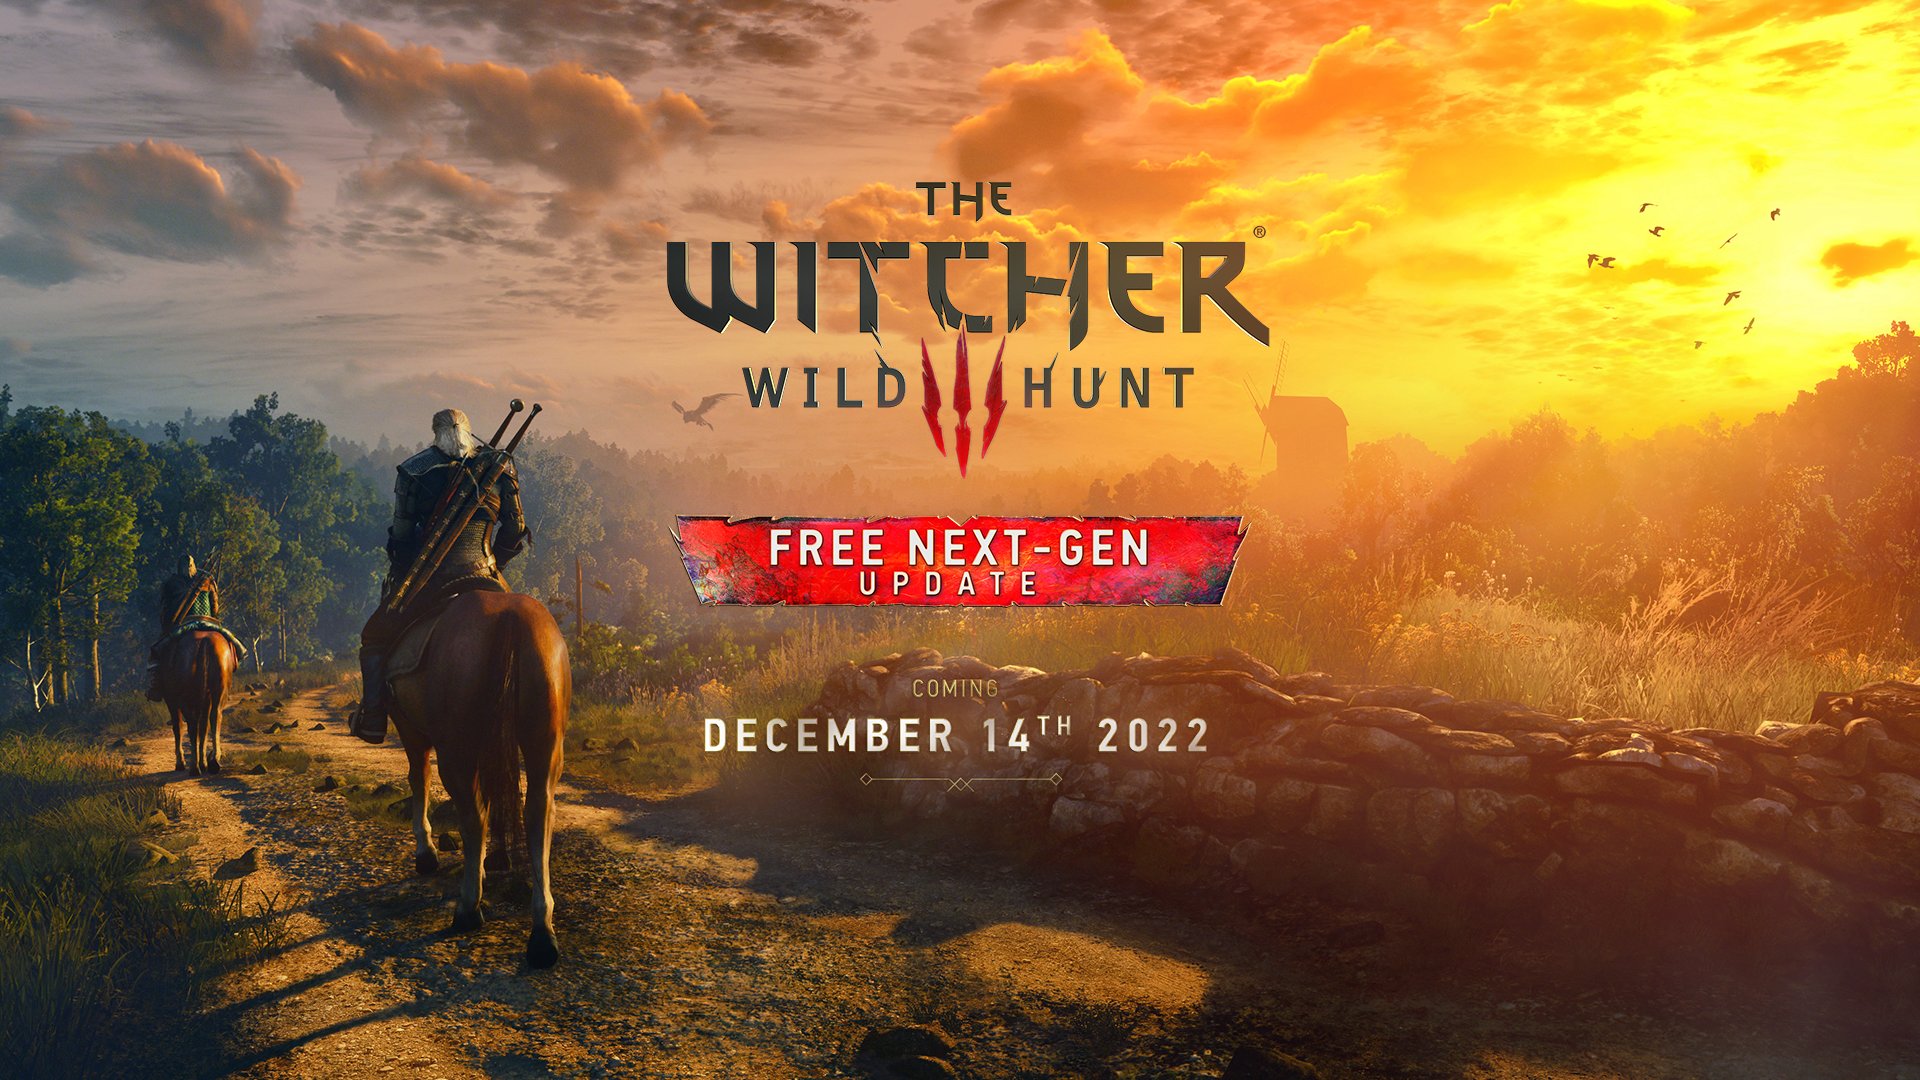 The Witcher 3: Wild Hunt - Official Website